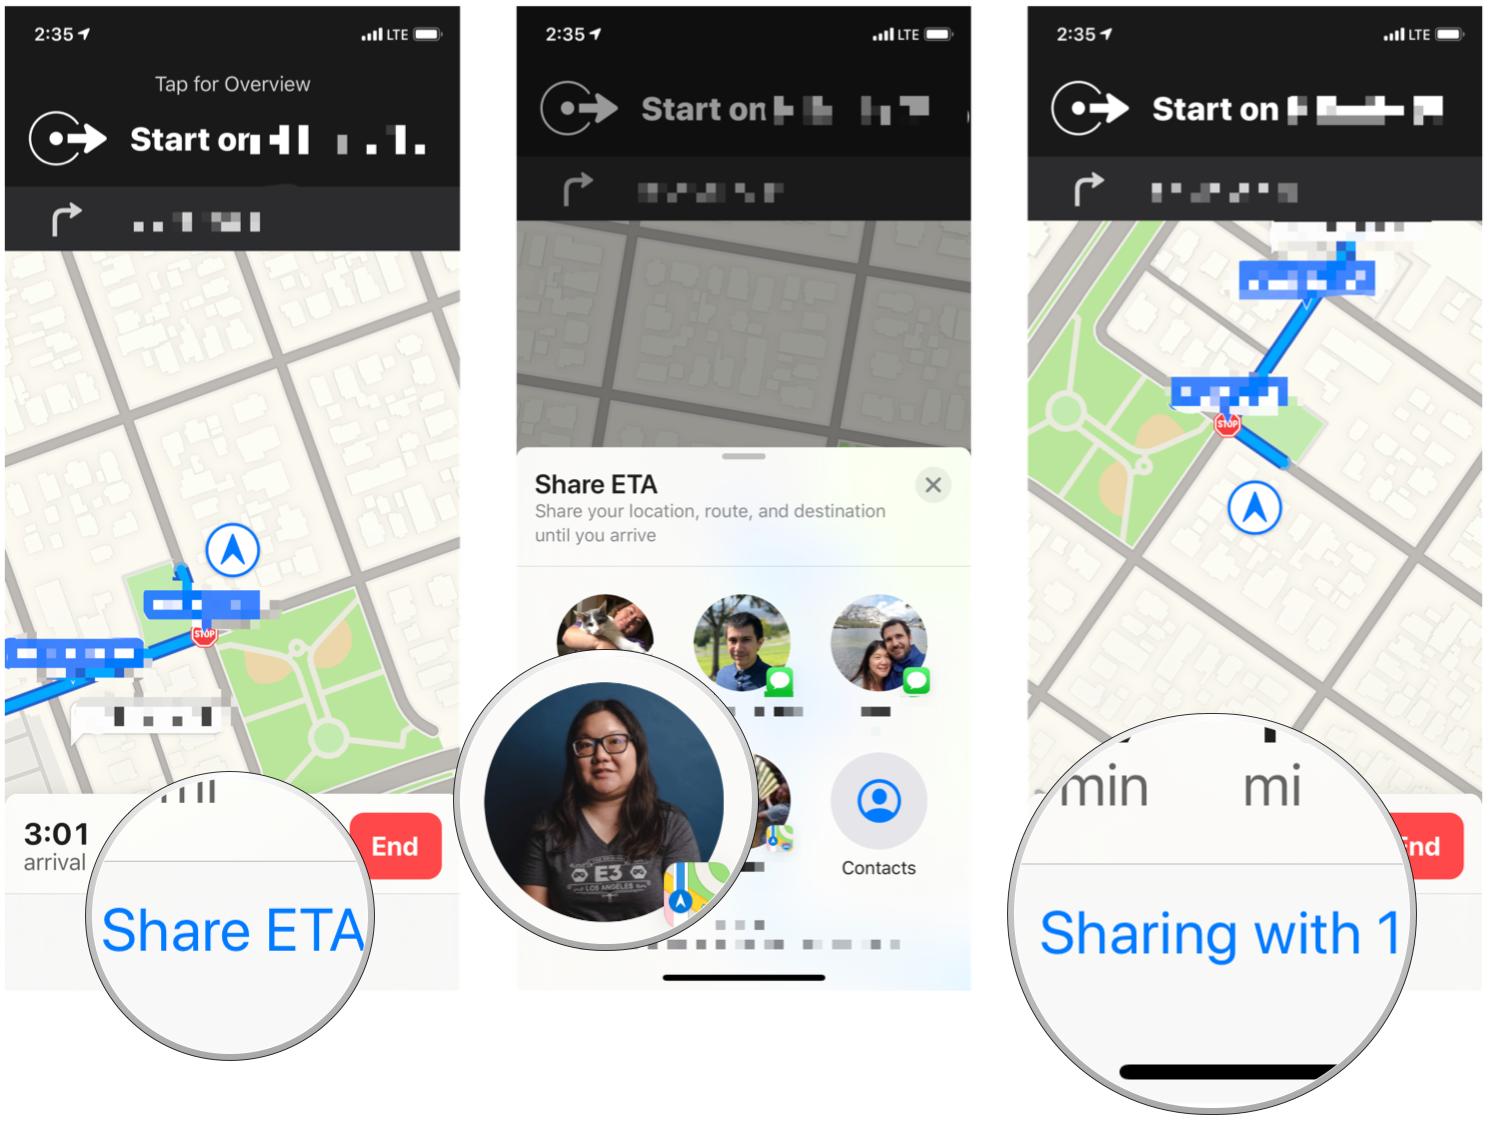 Tap Share ETA and select as many contacts as necessary